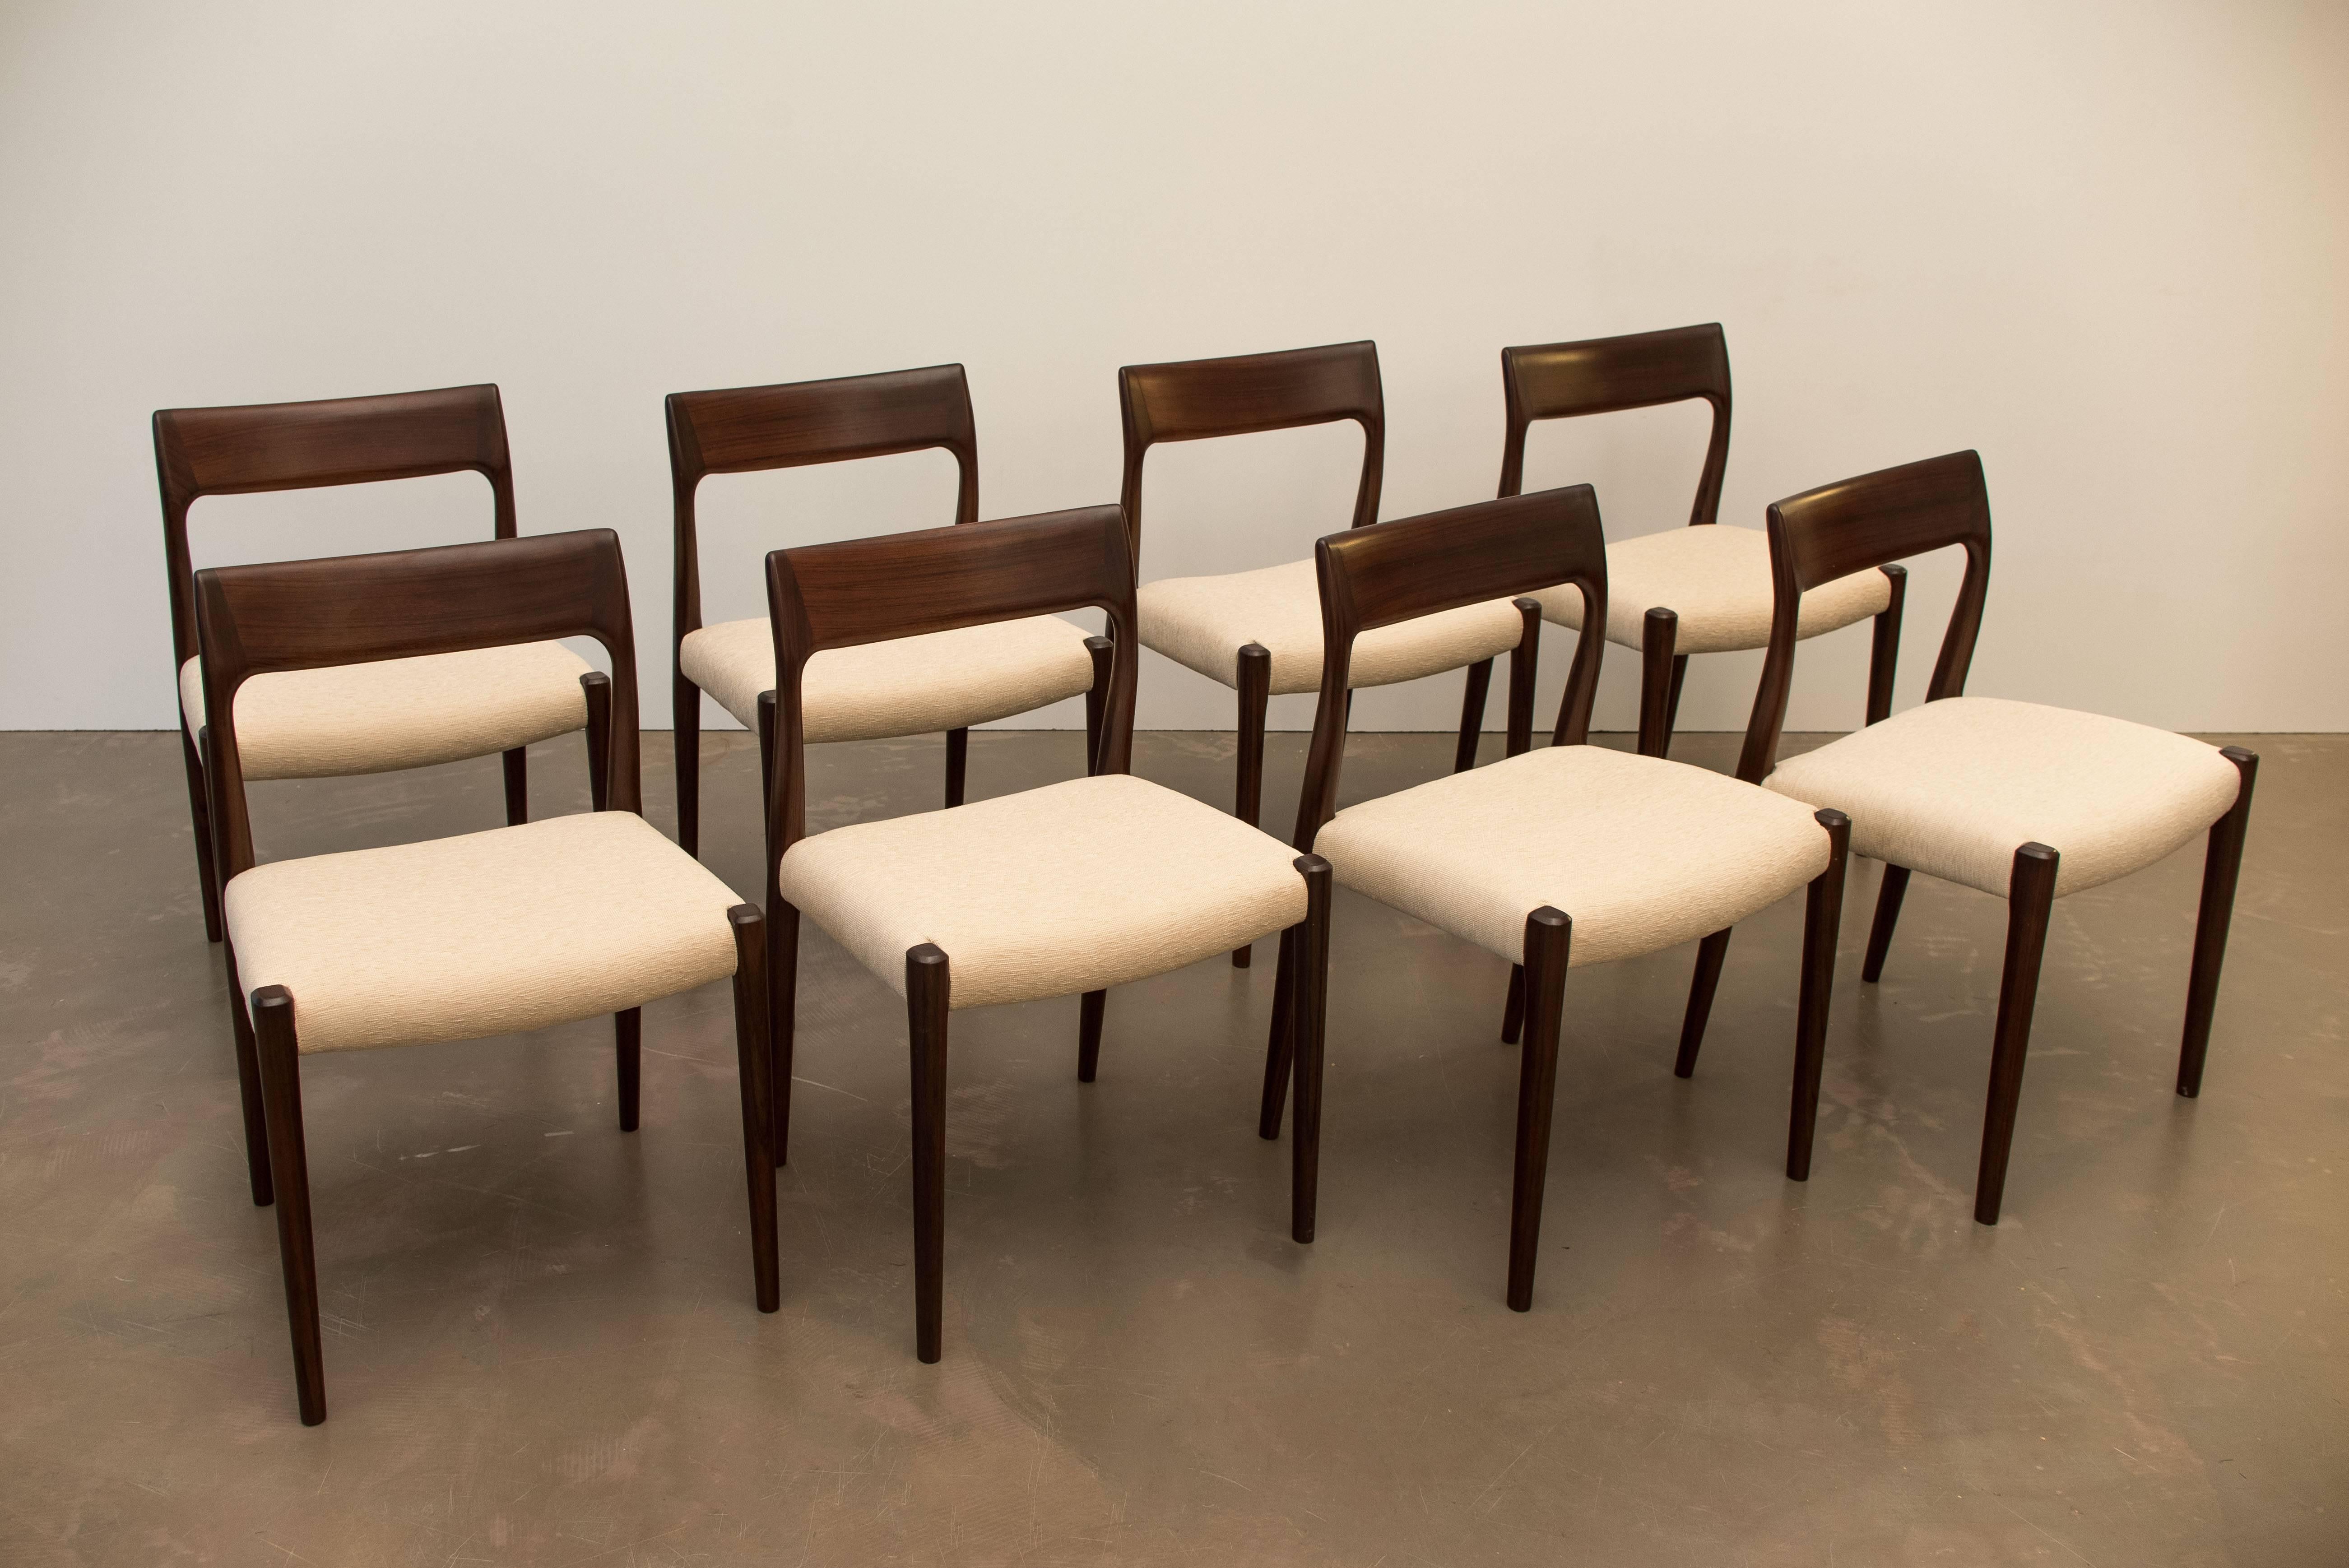 Set of eight dining chairs, designed by Nils Møller and manufactured by J.L. Møllers Møbelfabrik in the 1960s.